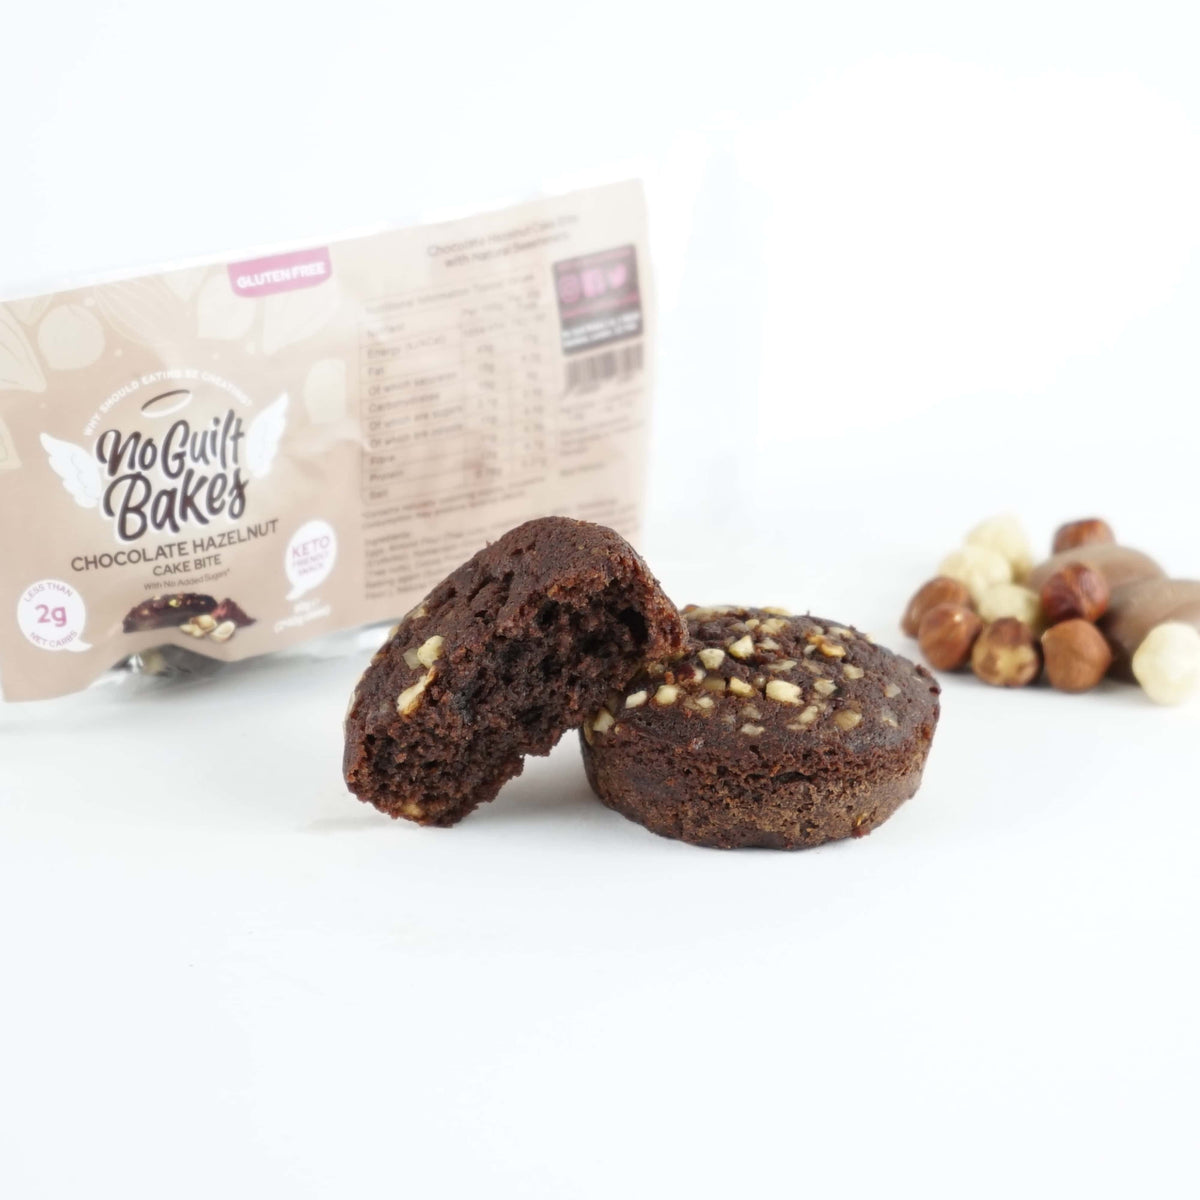 A Chocolate Hazelnut muffin with nuts and a No Guilt Bakes Gift for purchase over £30 bag next to it.